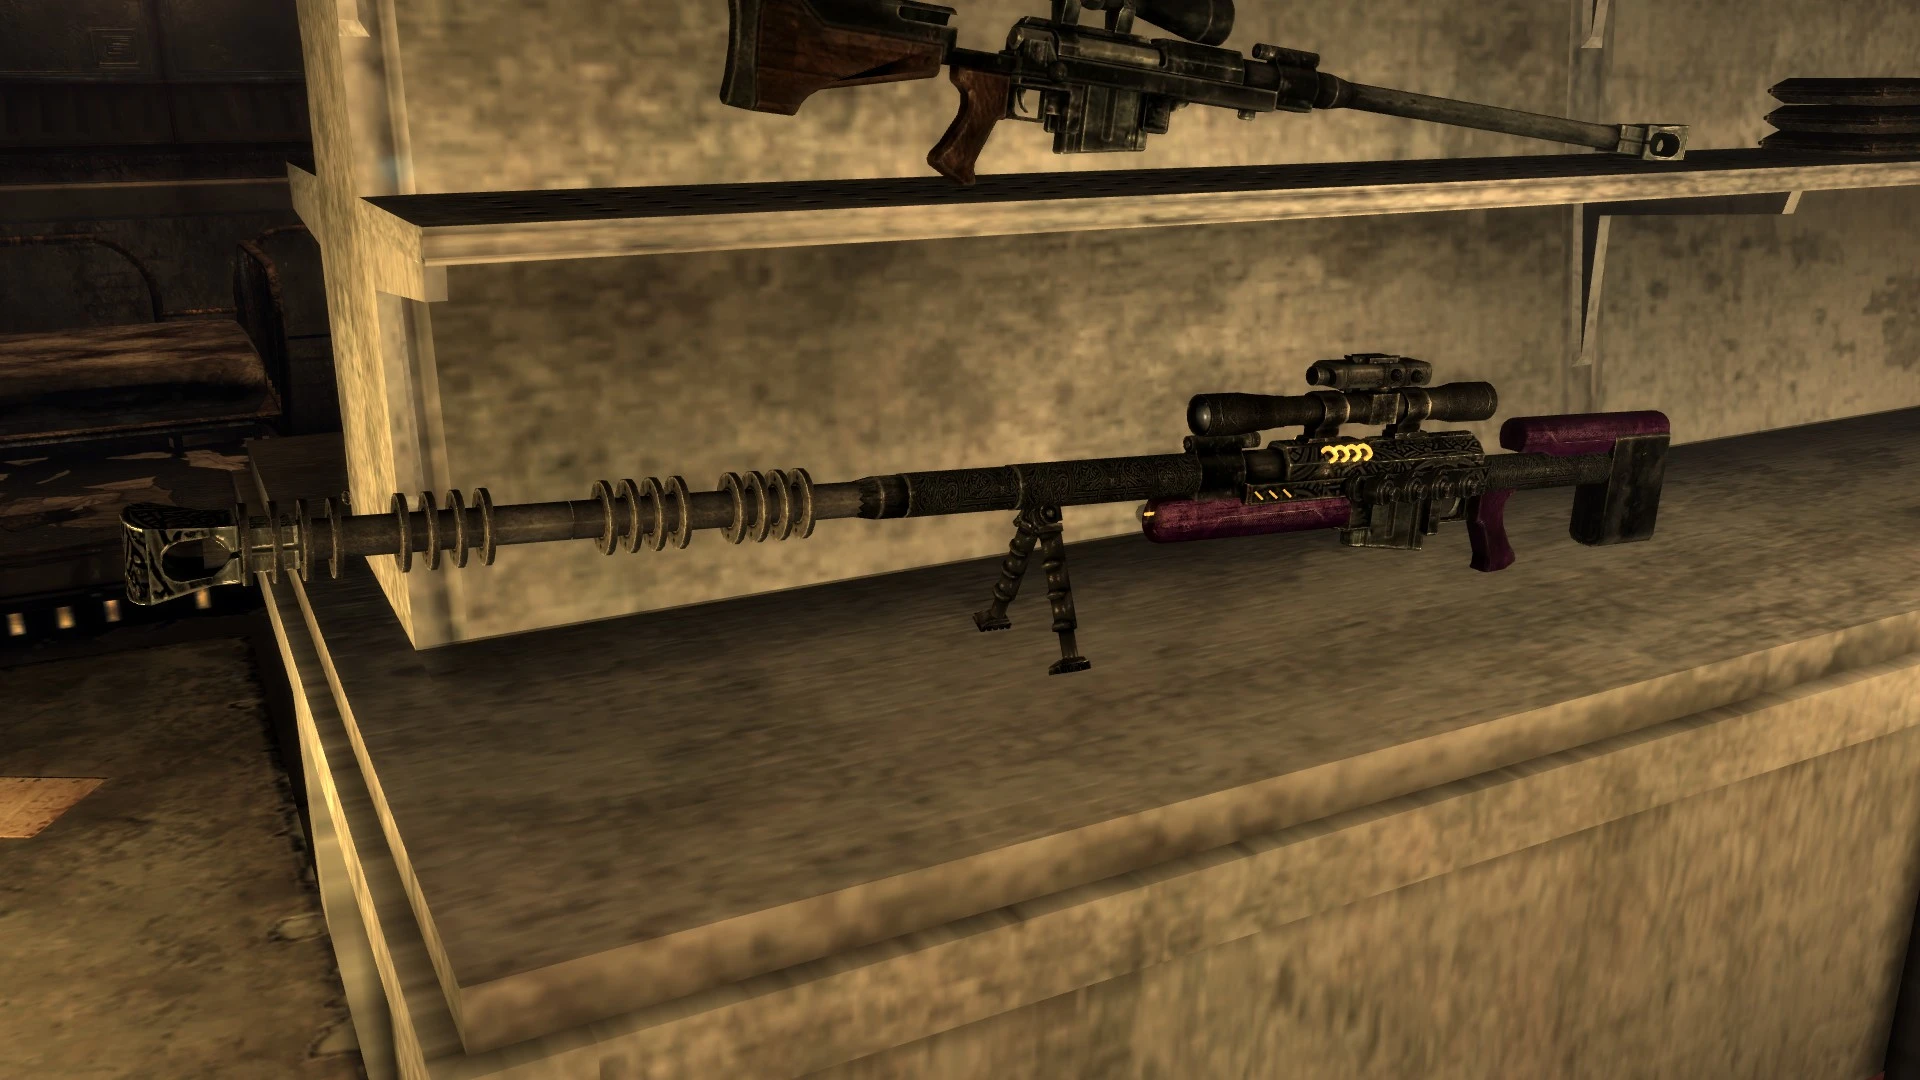 Hyena Infra Dead Sniper Rifle At Fallout New Vegas Mods And Community.